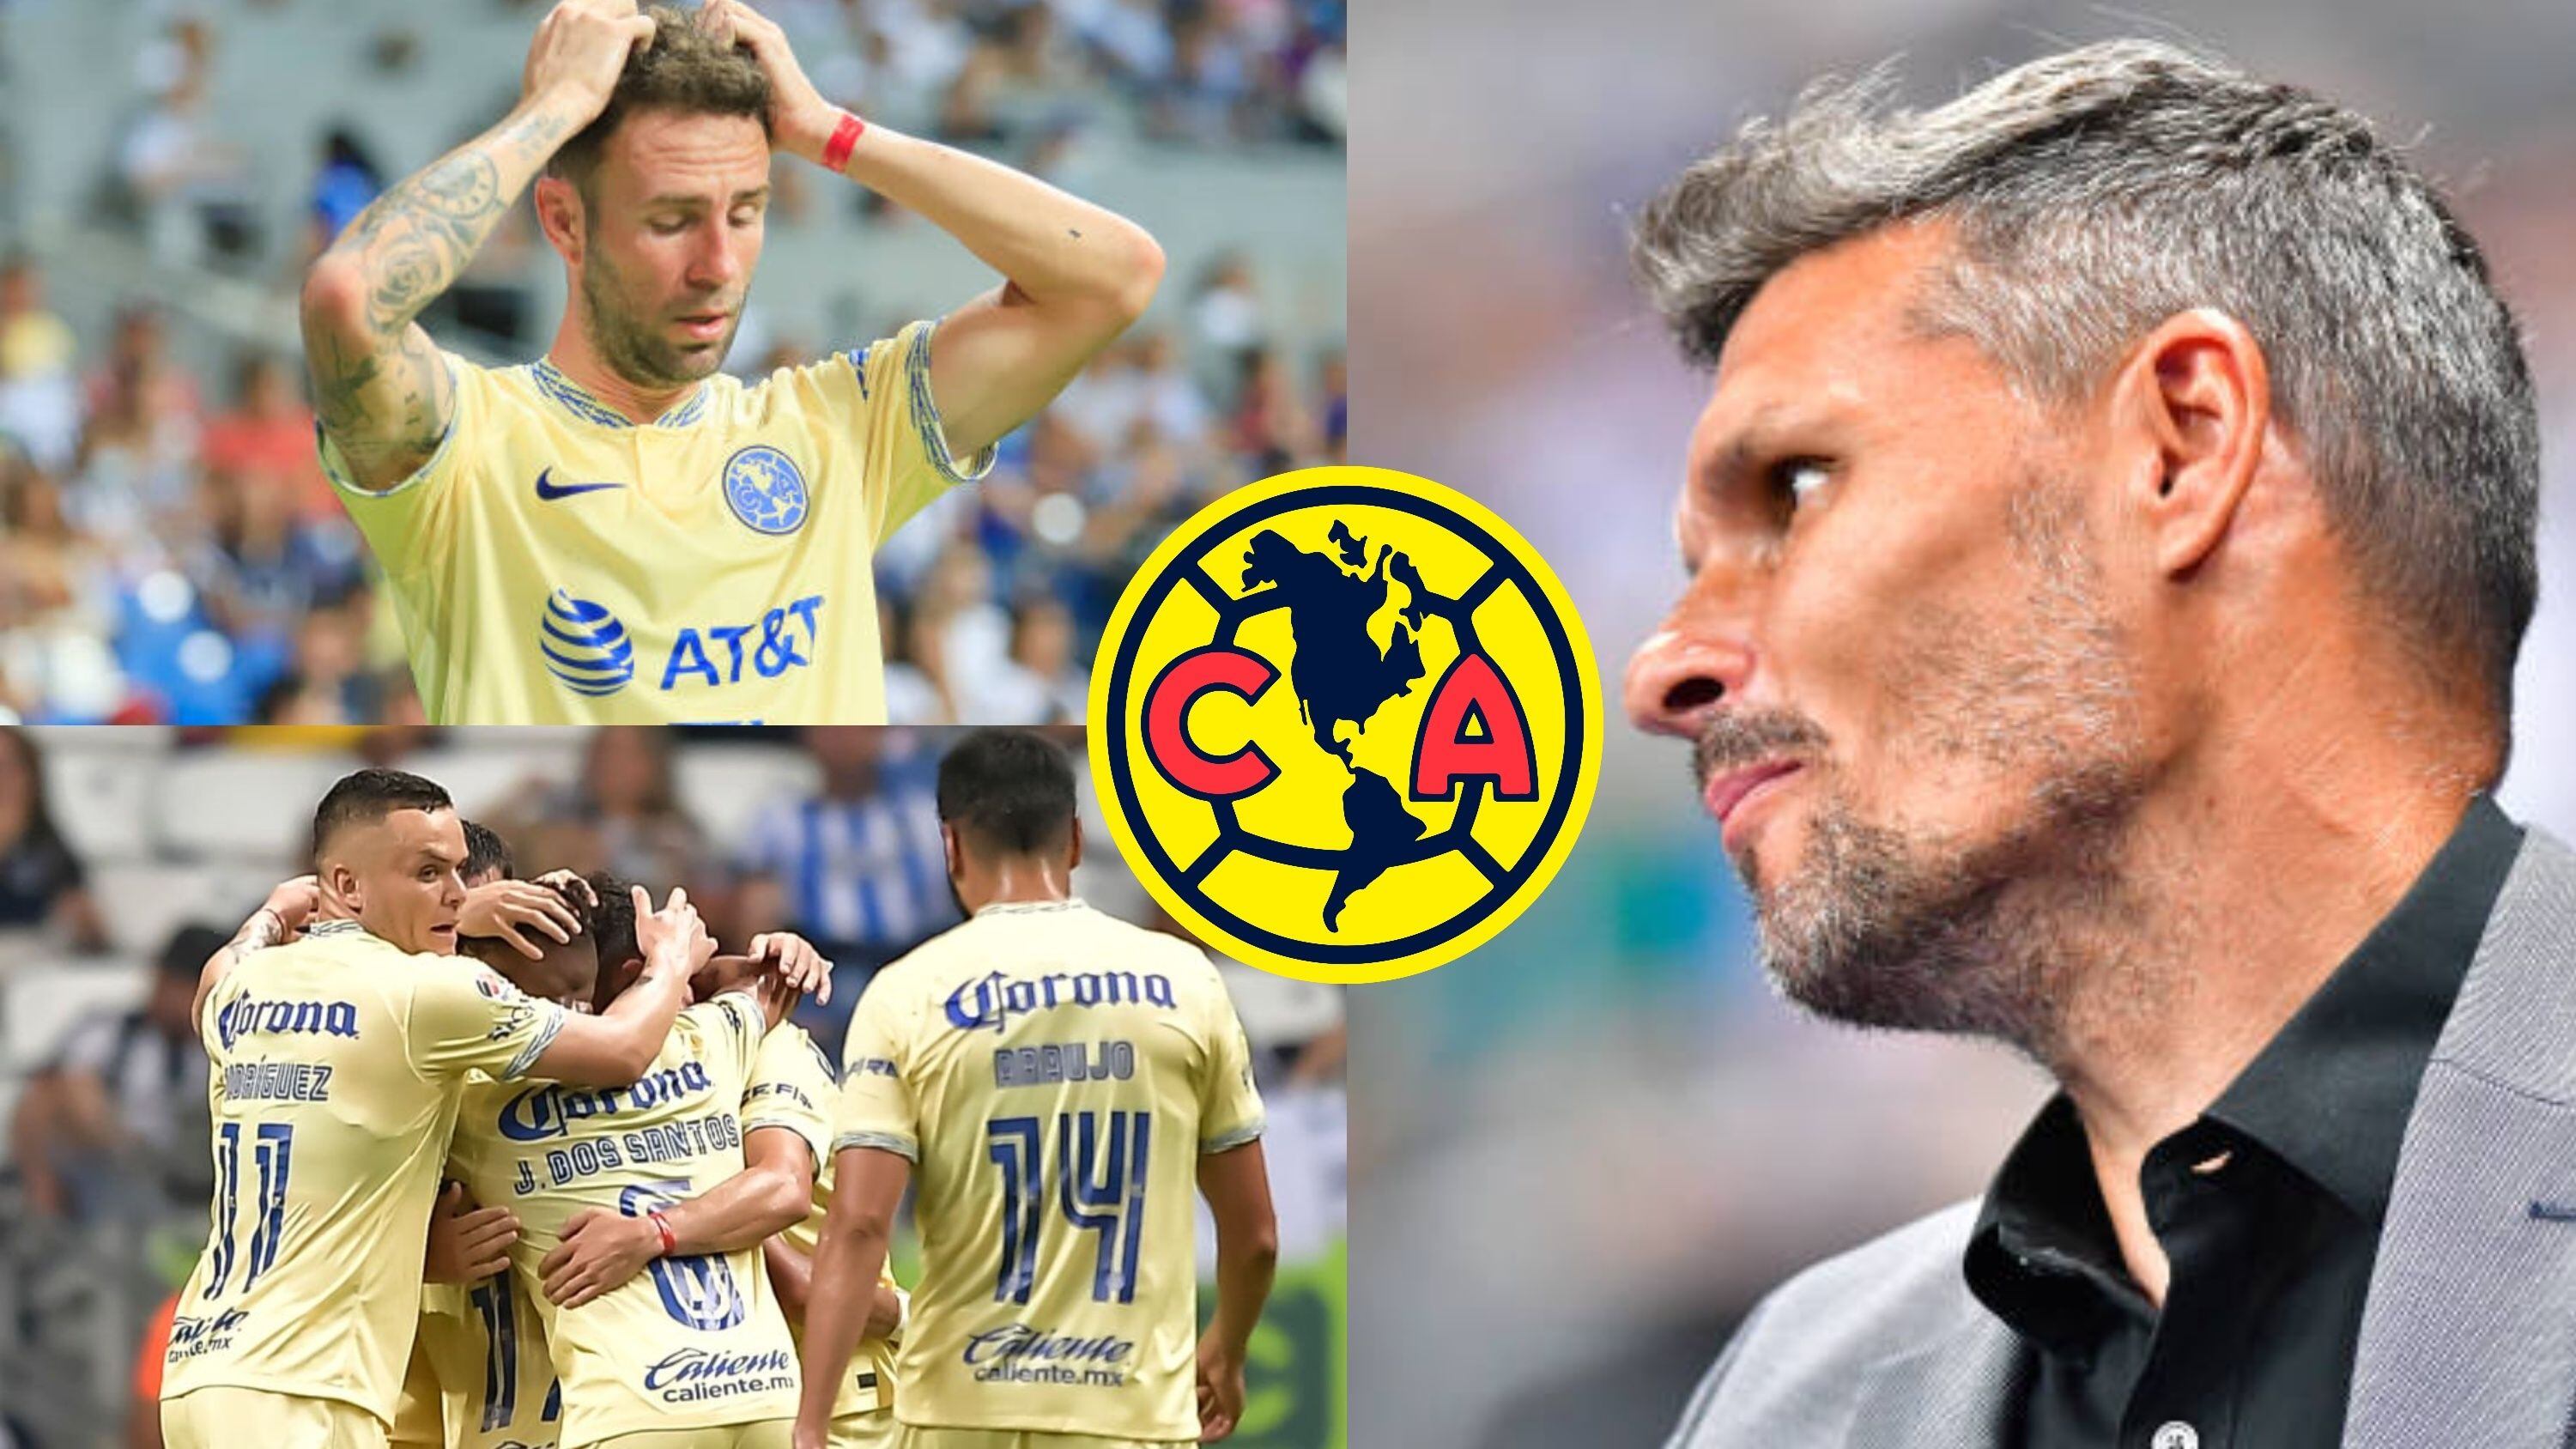 América's player who will not return to the starting lineup after the loss to Rayados